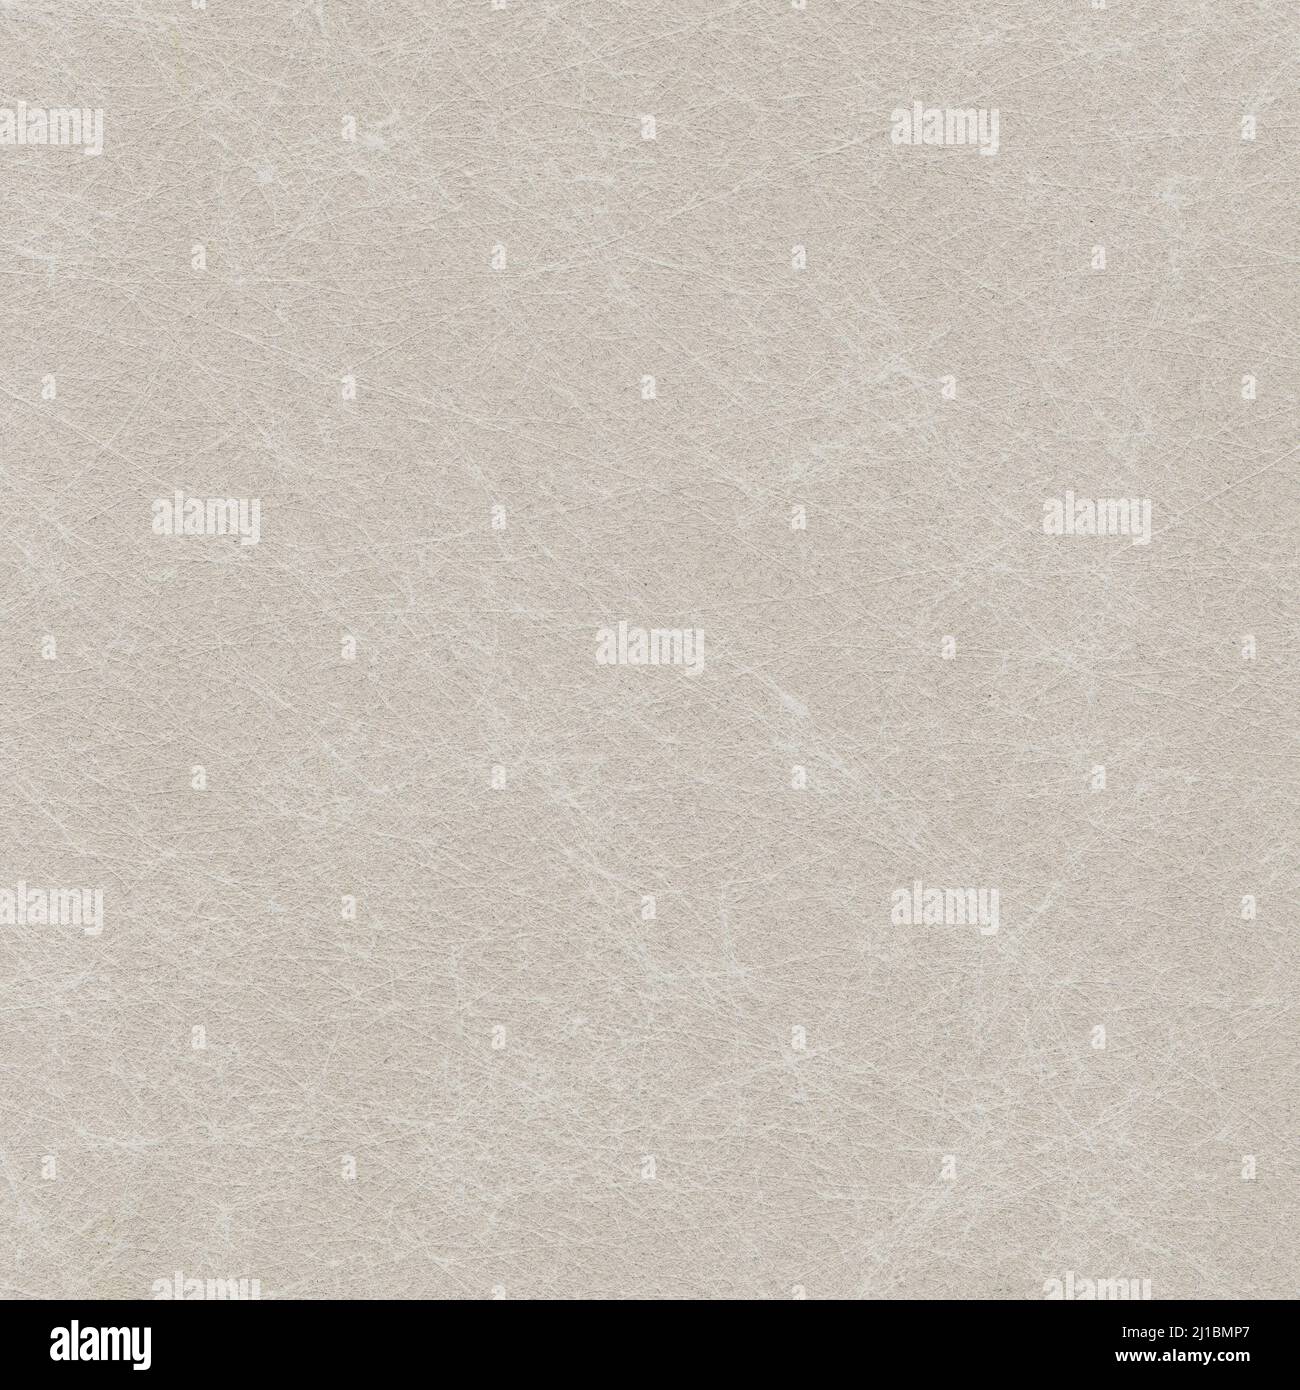 Gray paper background with white pattern Stock Photo